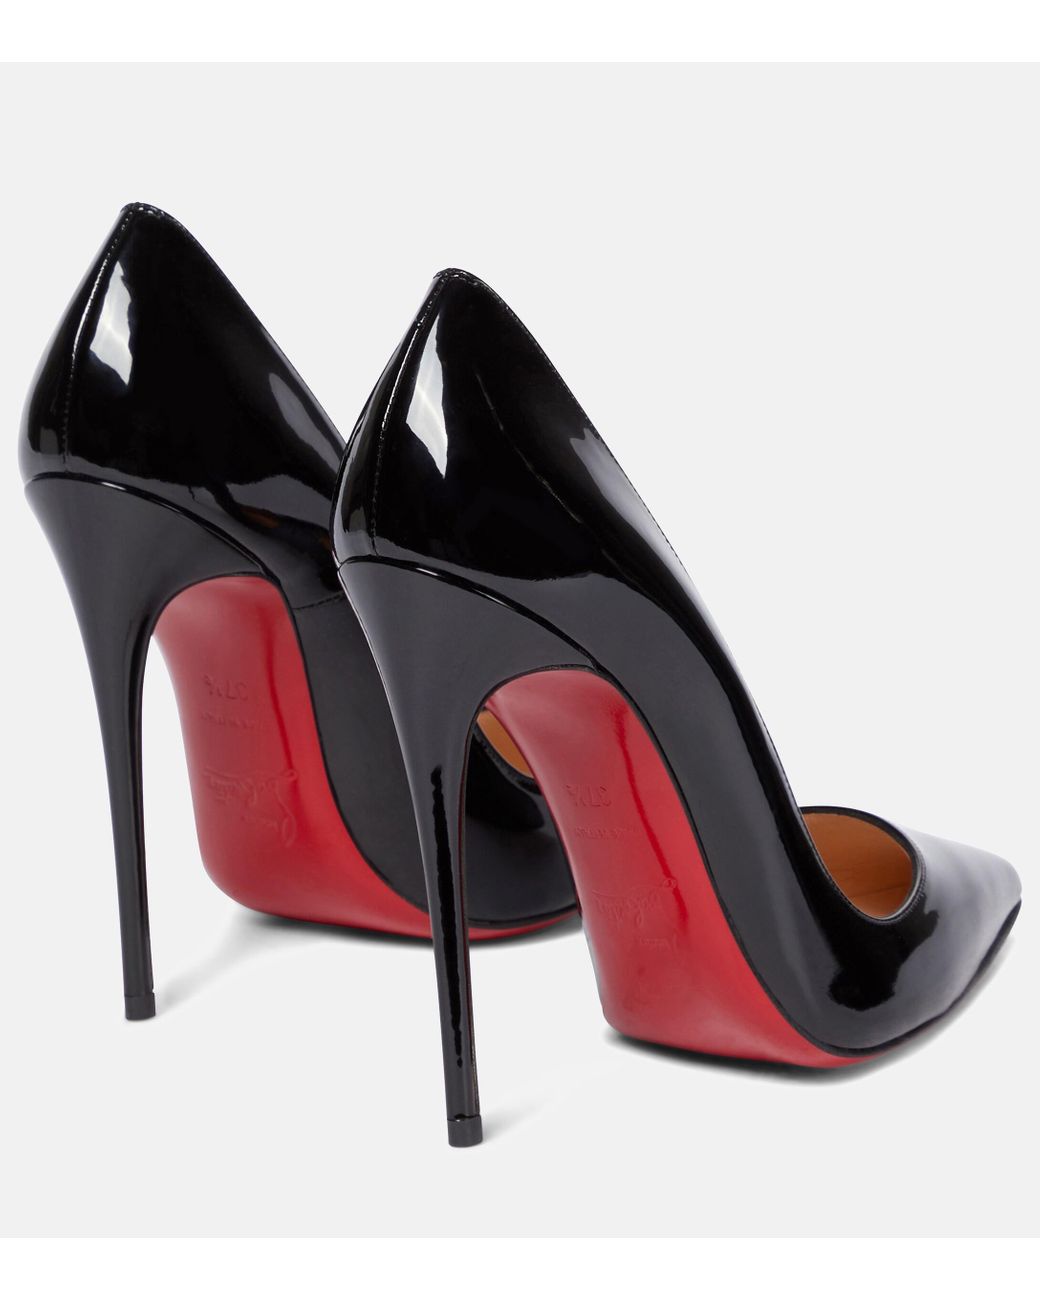 Christian Louboutin So Kate 120 Patent Leather Pumps in Black | Lyst UK